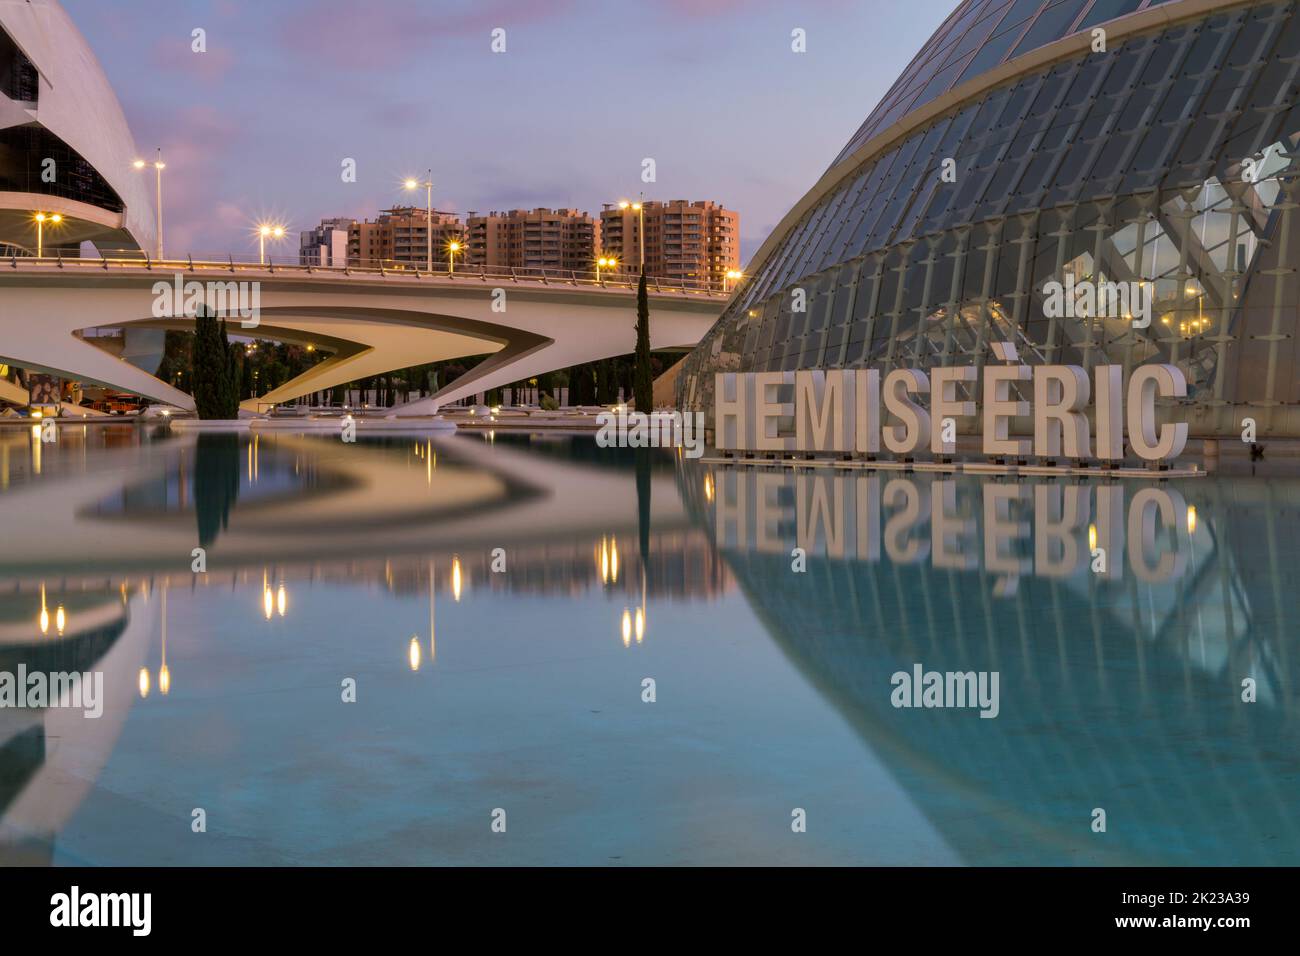 Hemisfèric, a digital 3D cinema & planetarium, by Montolivet Bridge at City of Arts and Sciences in Valencia, Spain at dawn in September Stock Photo